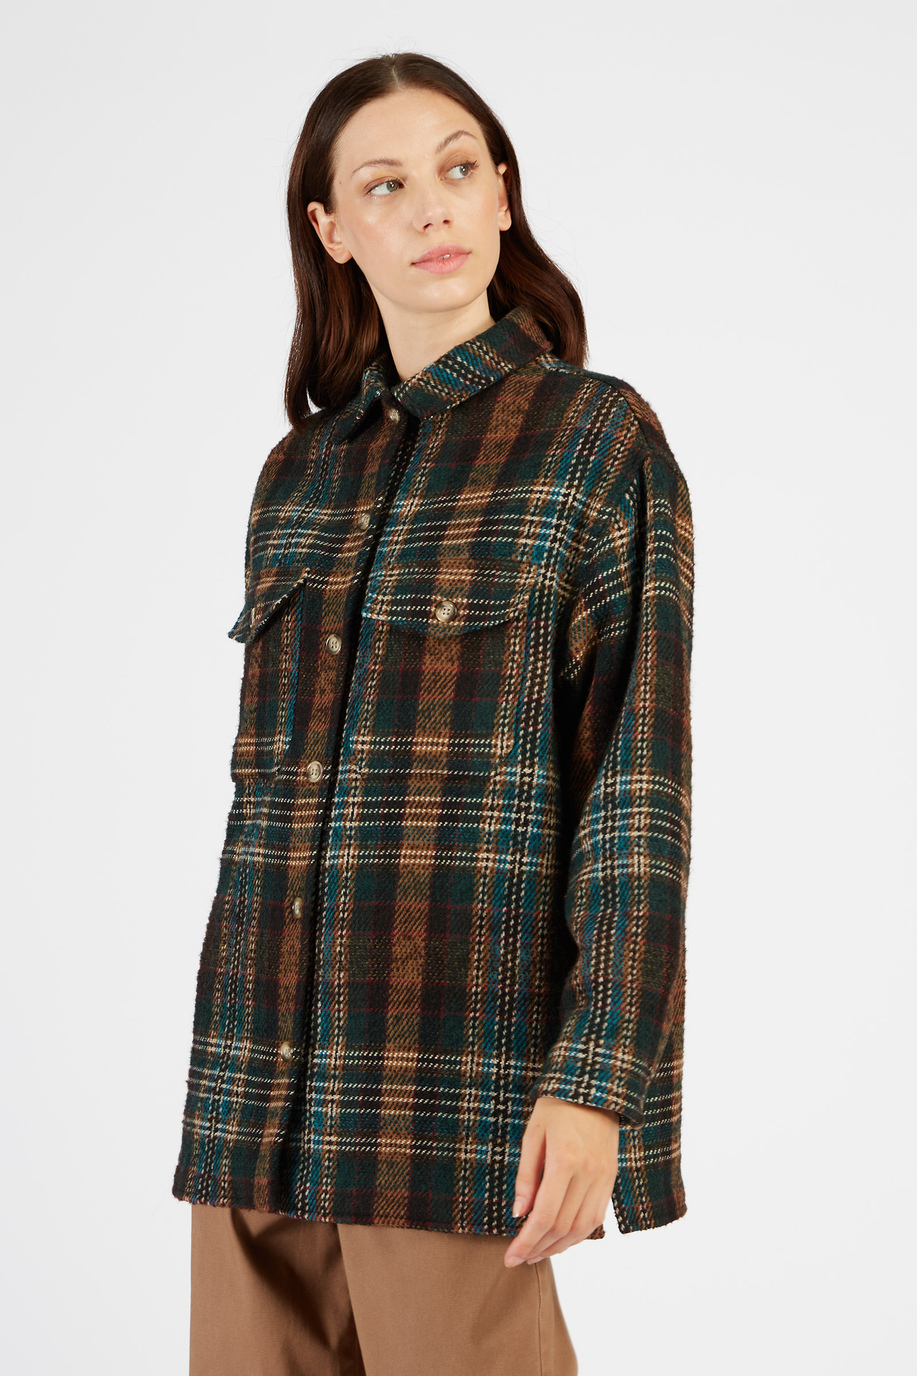 Women’s wool jacket long sleeves checked pattern regular fit - Preview | La Martina - Official Online Shop